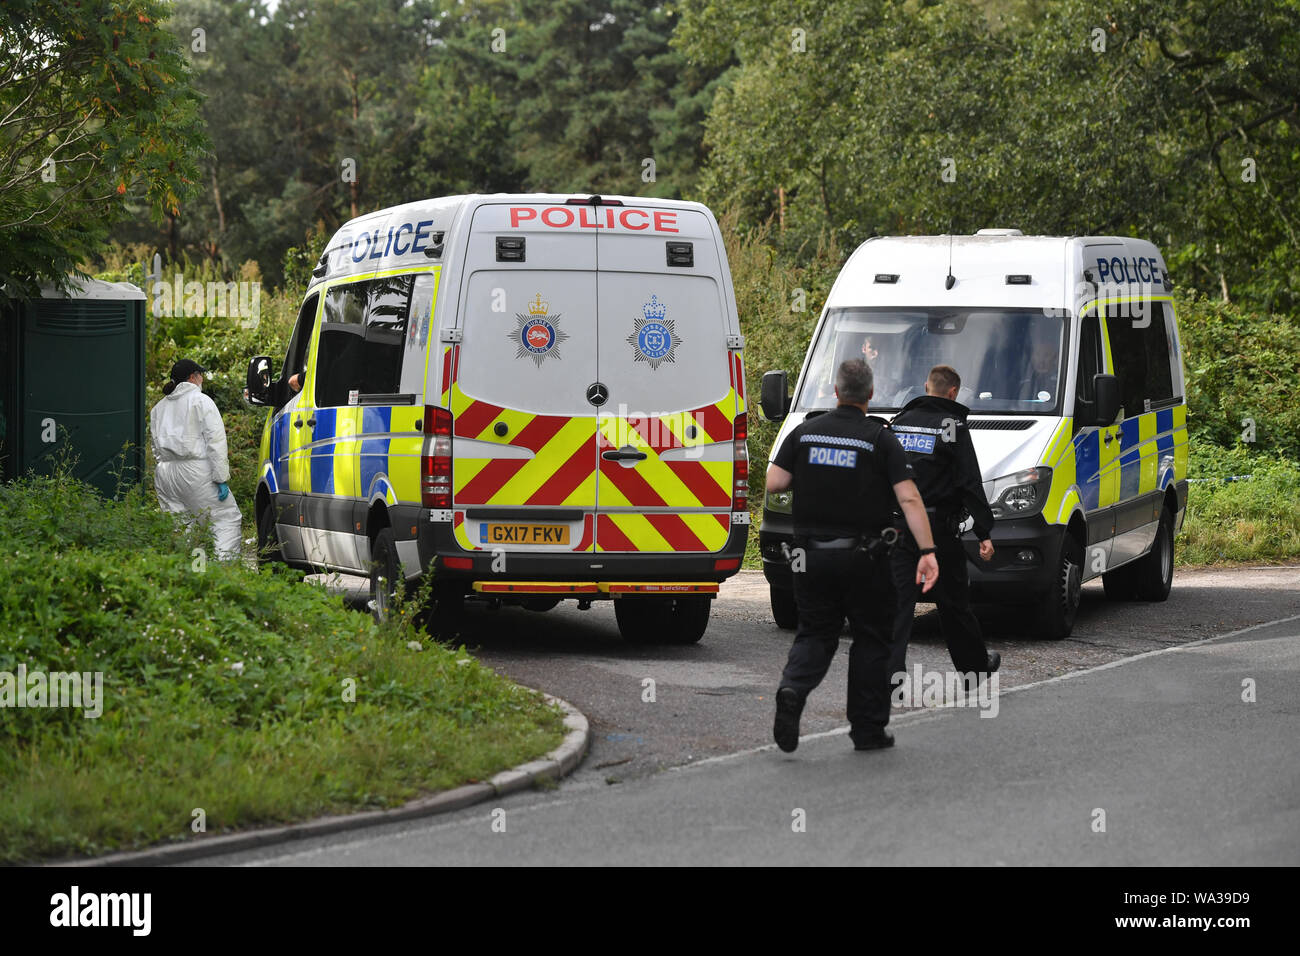 Police at a caravan site near Burghfield Common in Berkshire, following the death of Thames Valley Police officer Pc Andrew Harper, 28, who died following a 'serious incident' at about 11.30pm on Thursday near the A4 Bath Road, between Reading and Newbury, at the village of Sulhamstead in Berkshire. Stock Photo